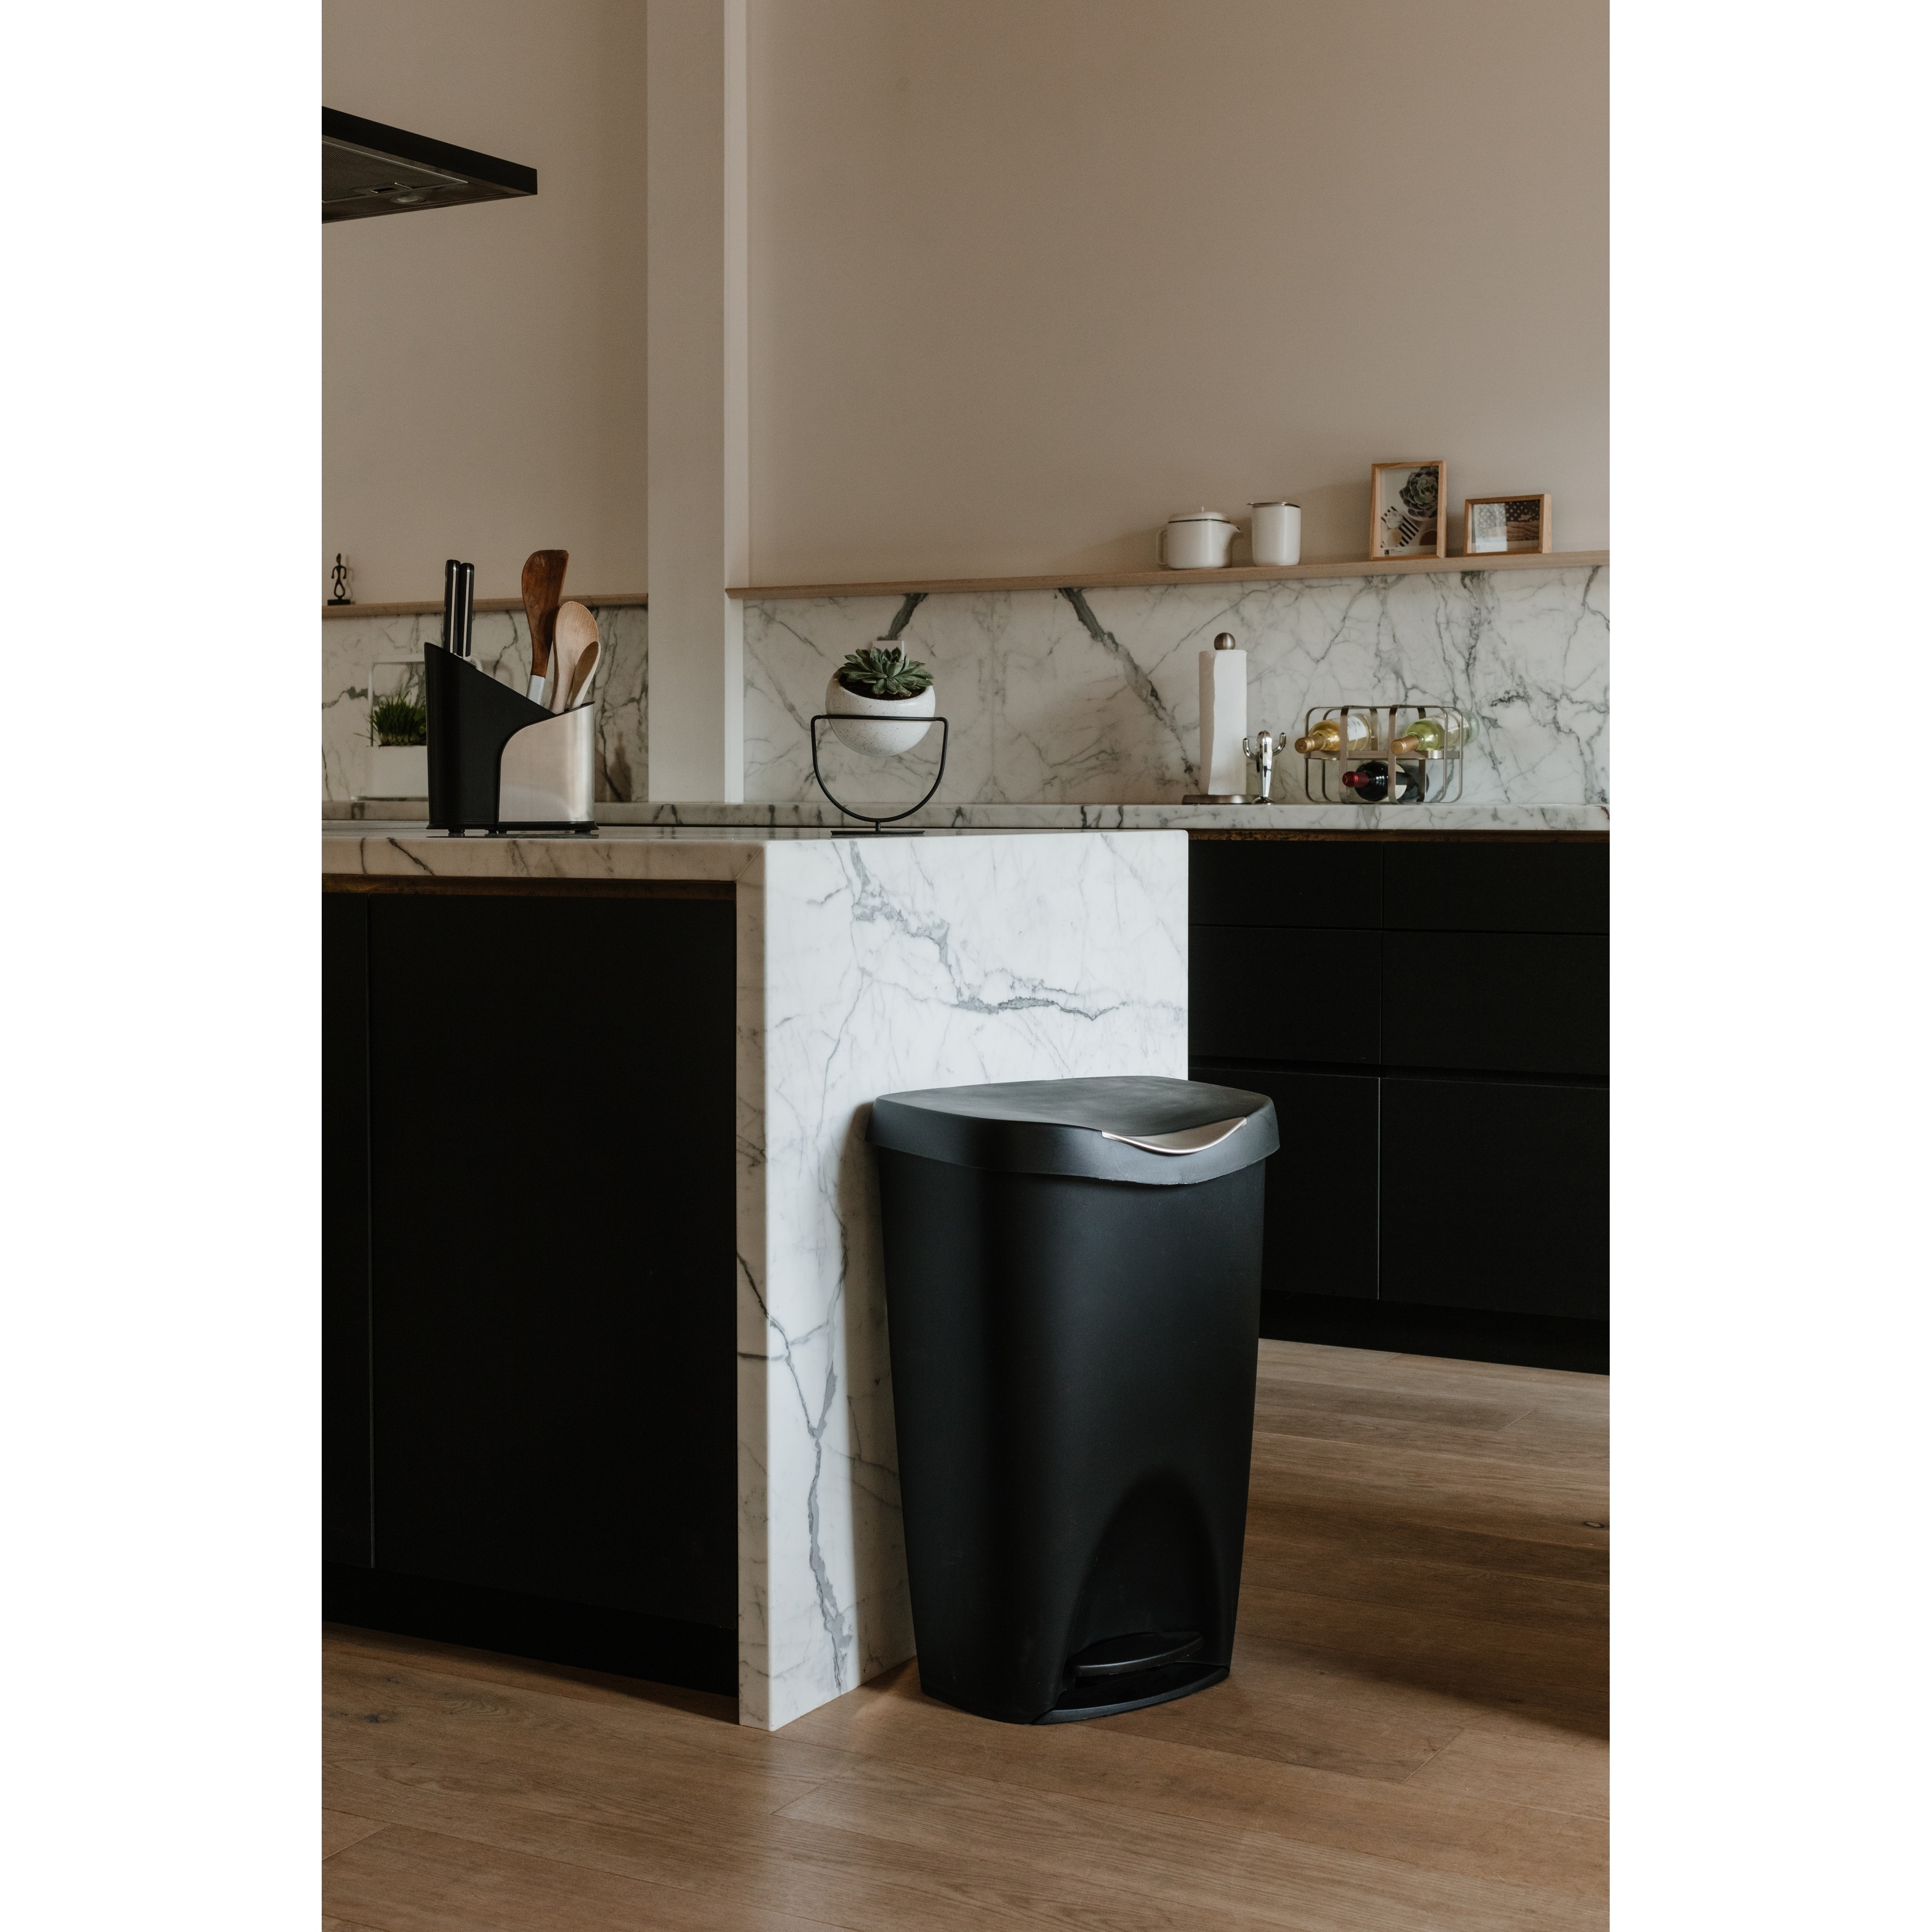 https://ak1.ostkcdn.com/images/products/is/images/direct/d517187412c92810c9e244aaa3d11064c6ee5d47/Umbra-Brim-Large-13-Gallon-Trash-Can-with-Foot-Pedal-and-Lid.jpg